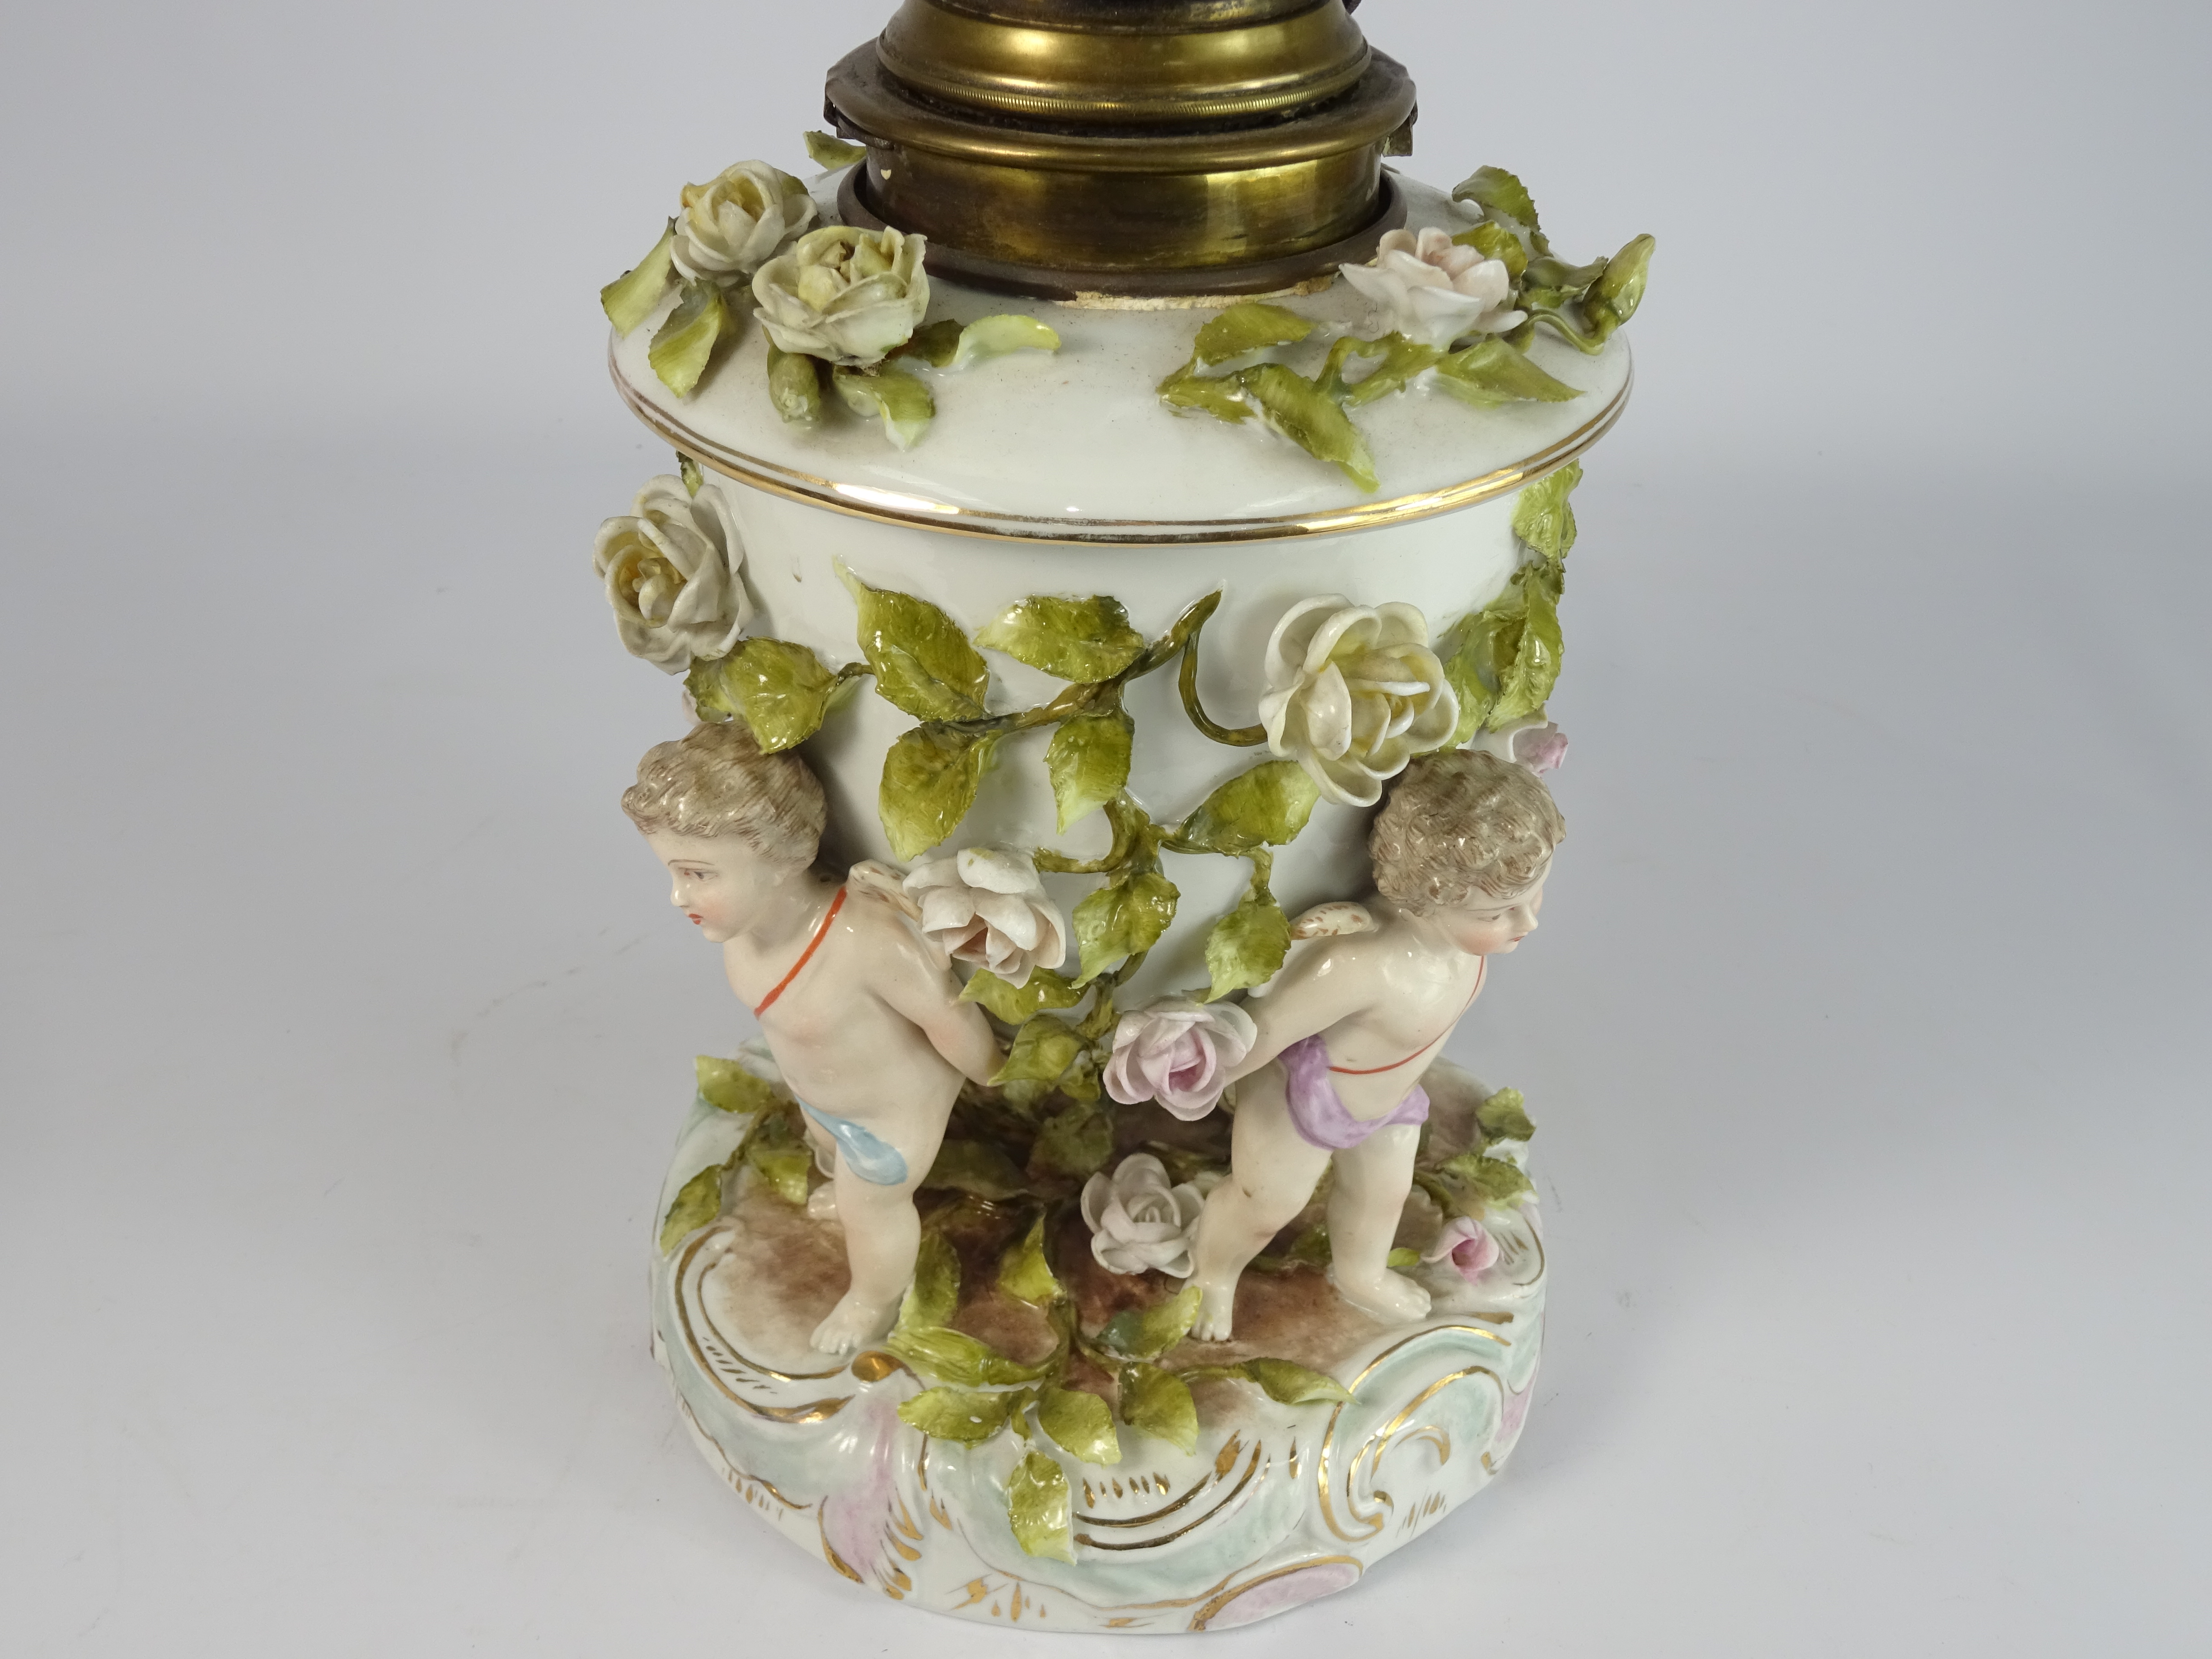 Thuringian Table oil Lamp, the base with encrusted flowers and on cherub supports, H51cm. - Image 2 of 2